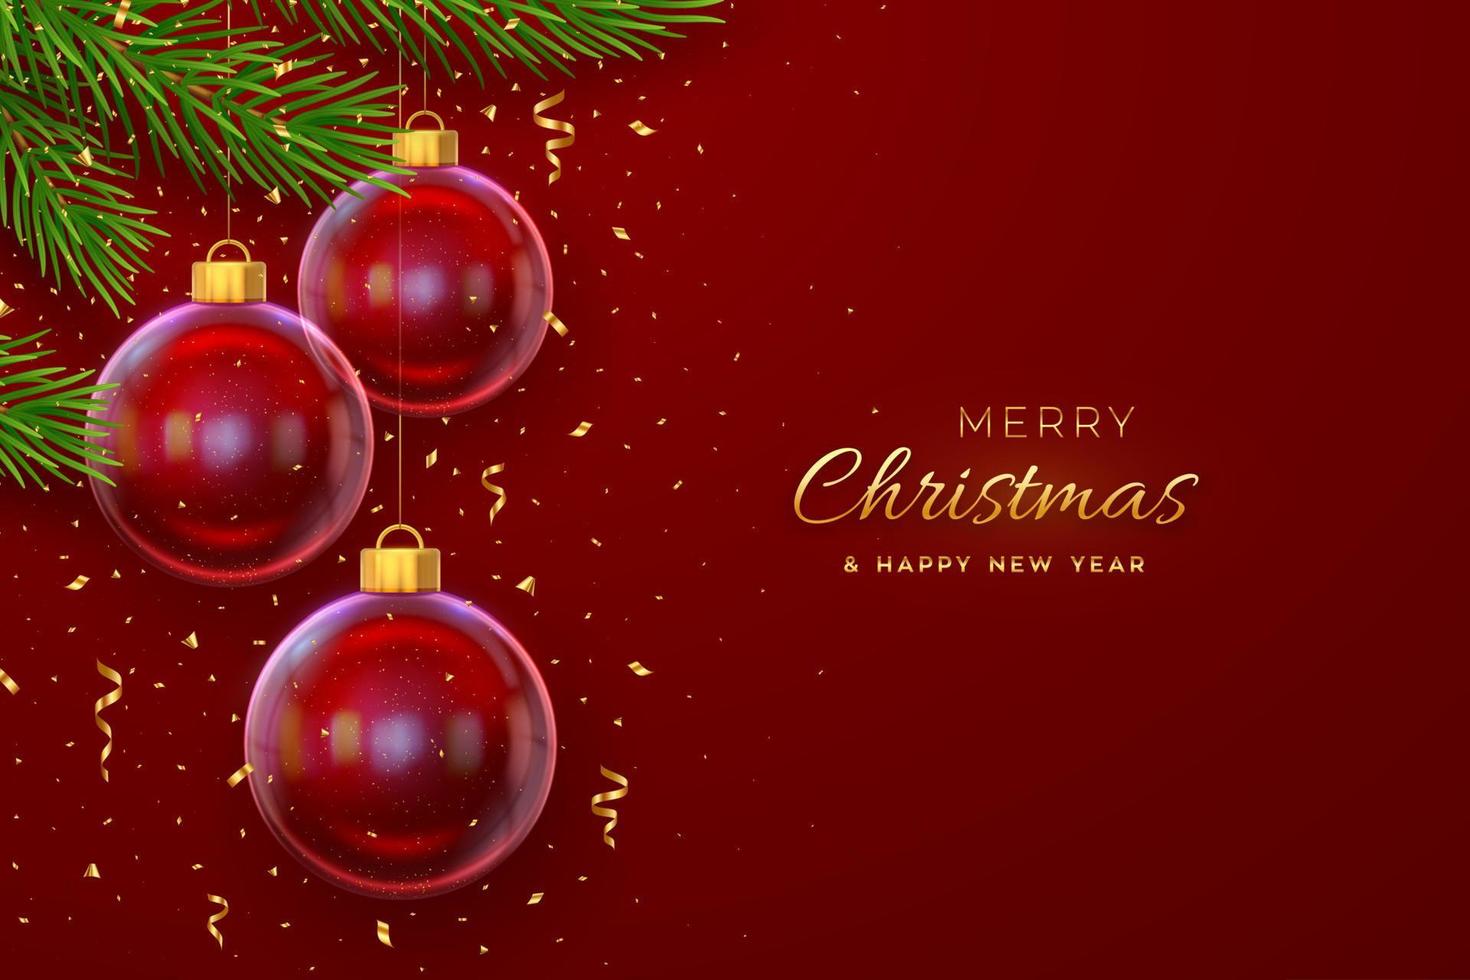 Merry christmas greeting card or banner. Hanging transparent glass balls, pine branches on red background with golden falling confetti. New Year 3d design. Holiday Xmas baubles. Vector illustration